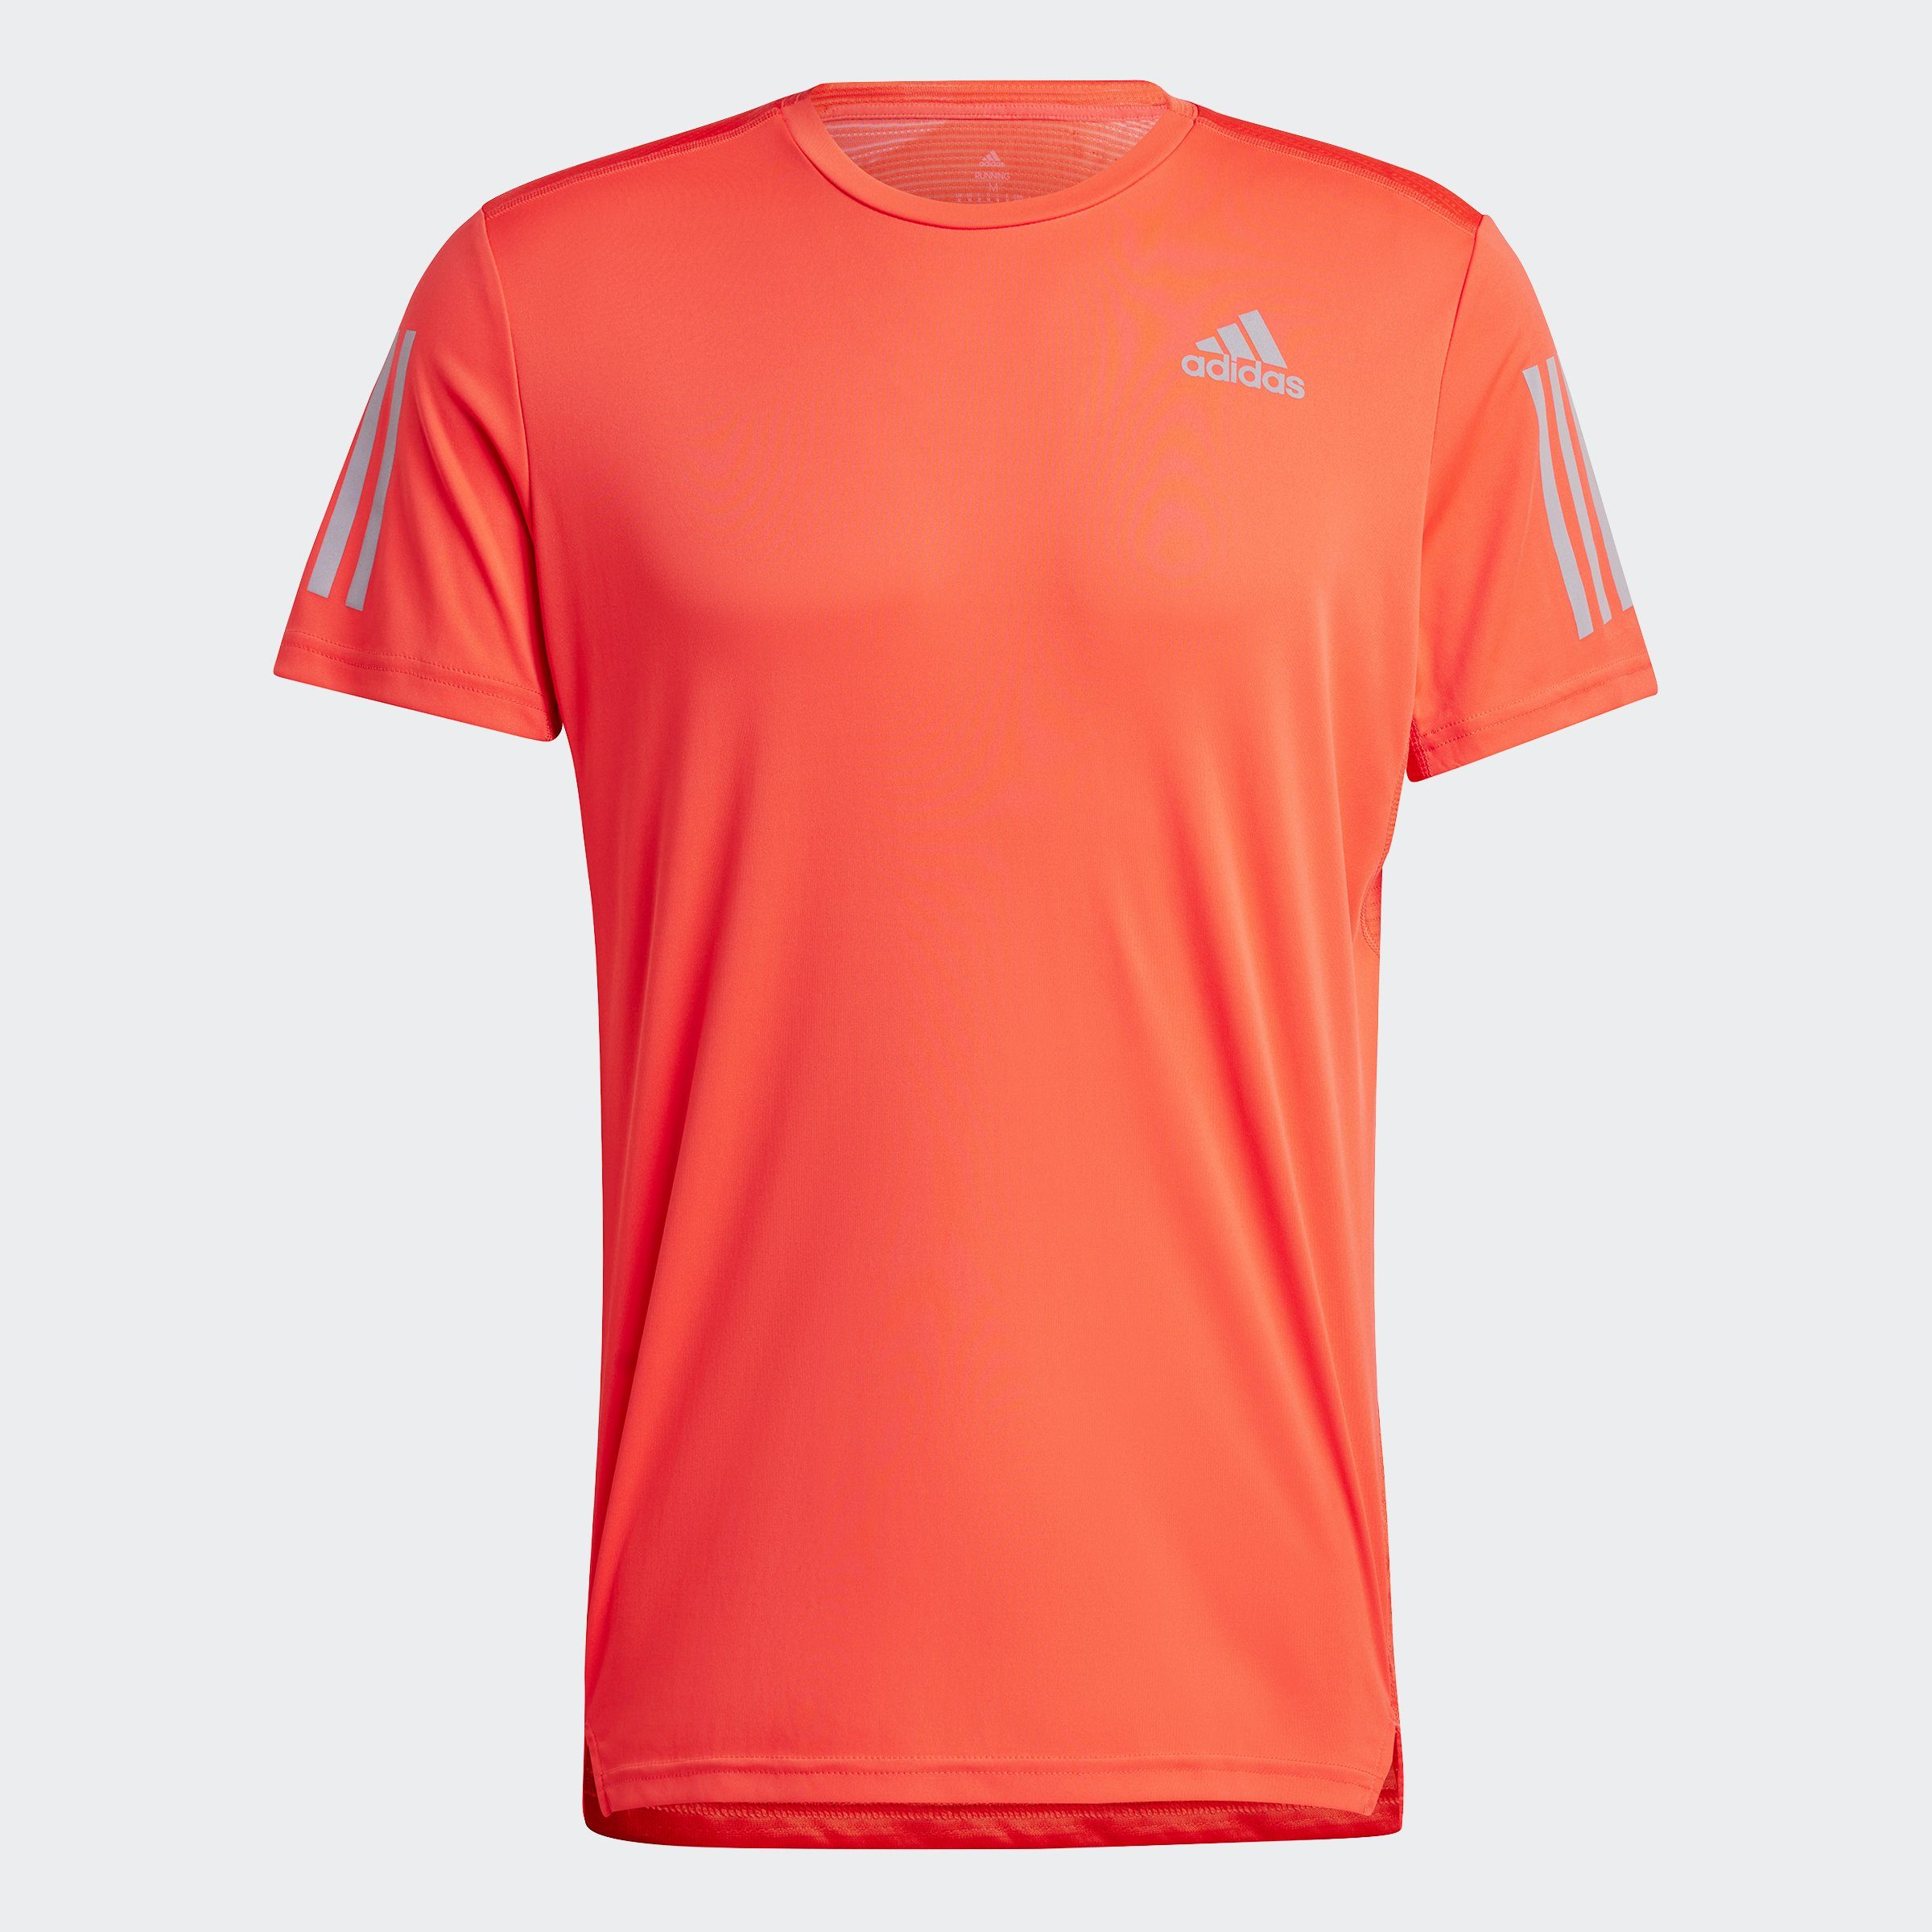 adidas Performance Laufshirt OWN THE RUN Silver Reflective Bright Red 